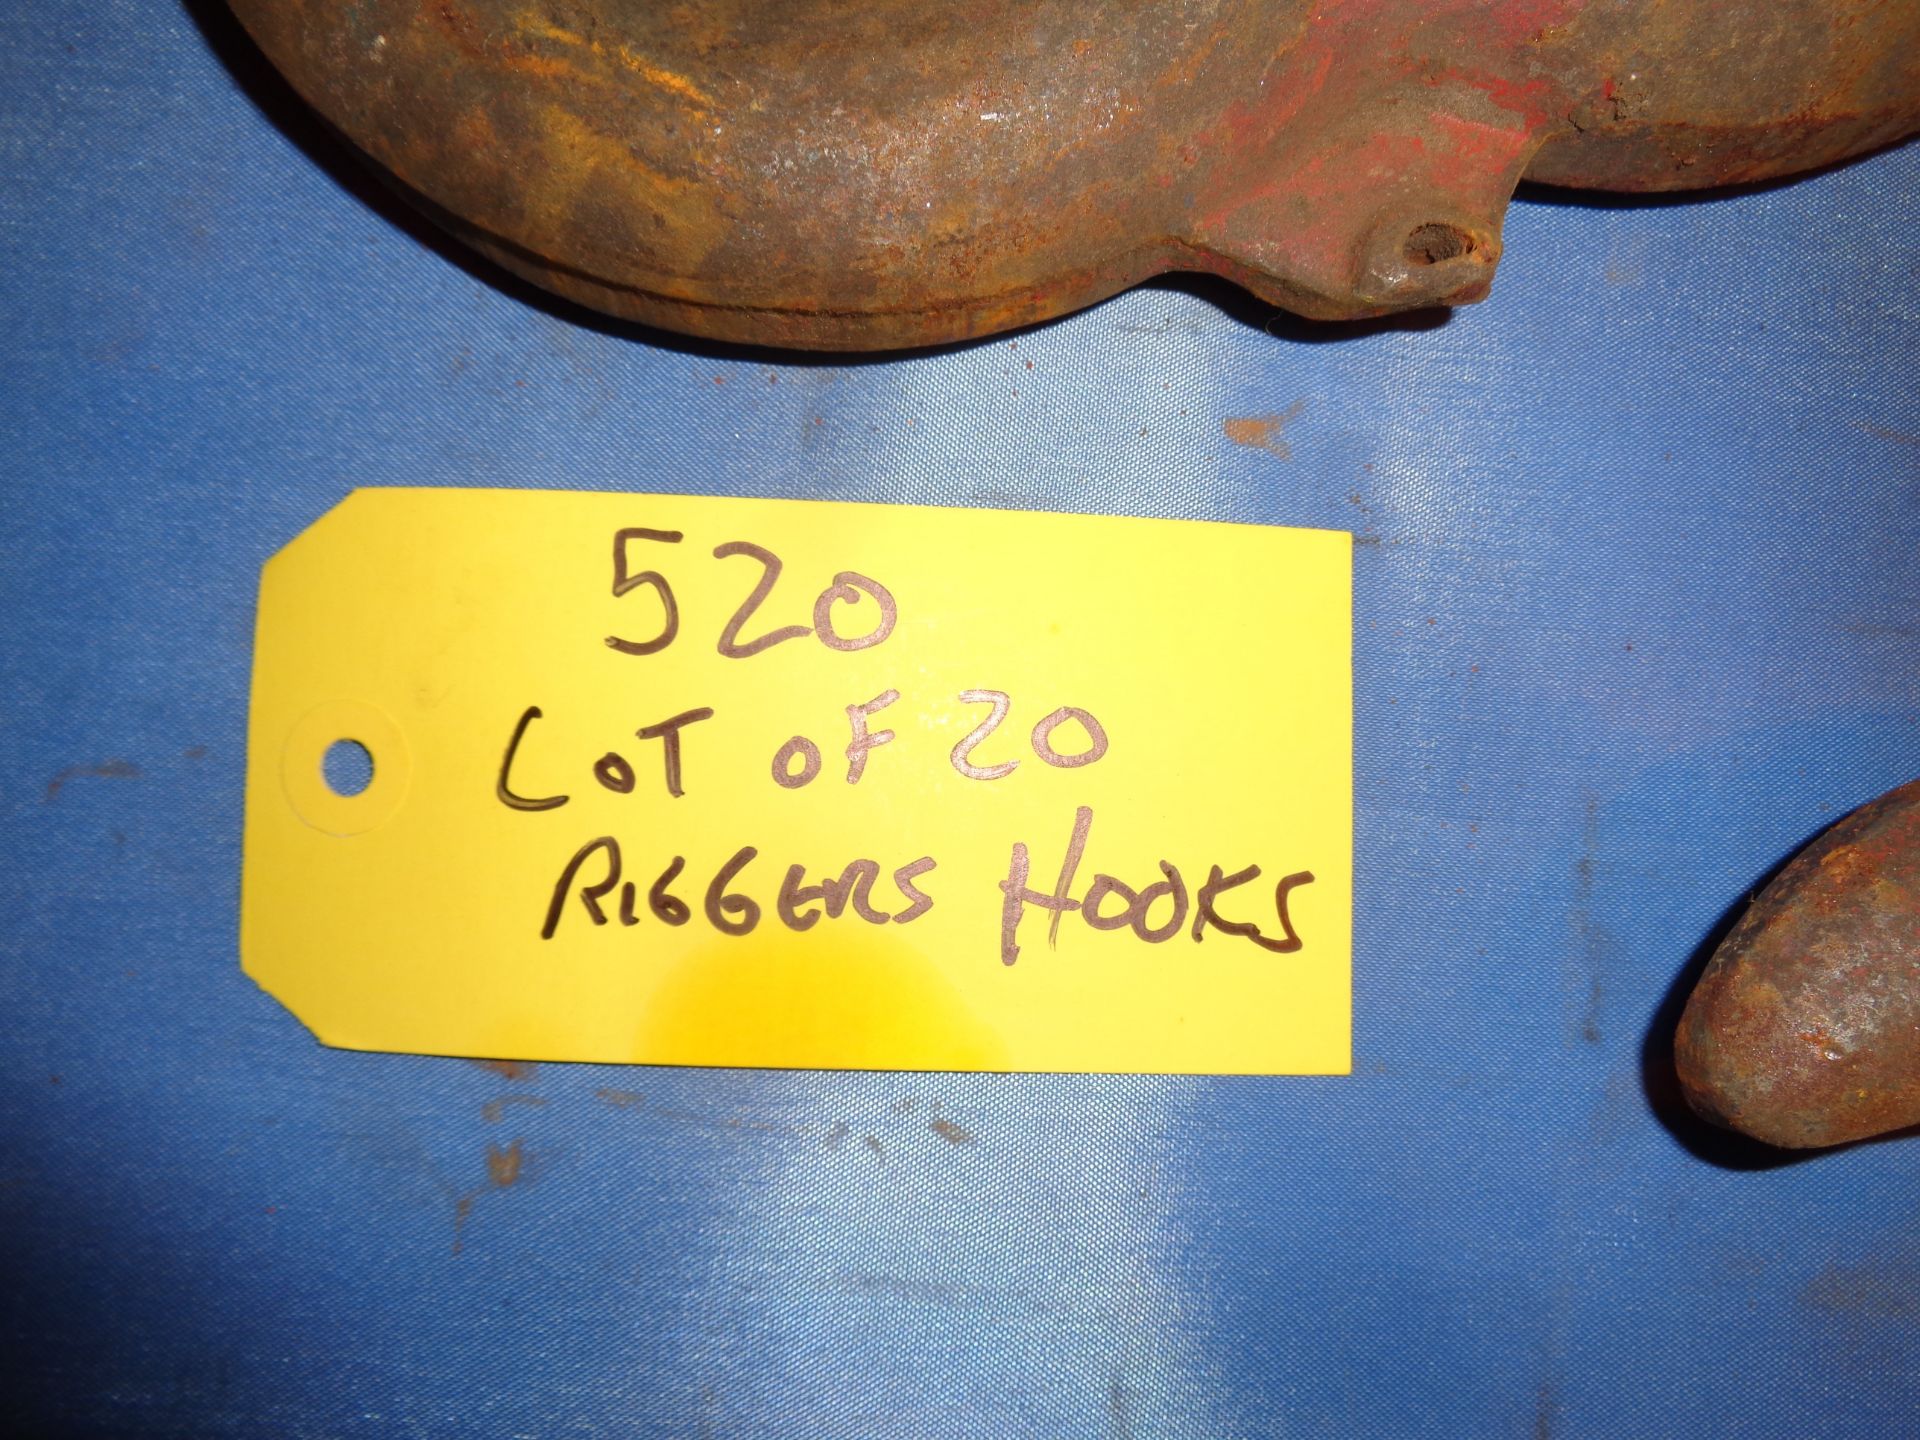 Lot of 20 Riggers Hooks (520) - Image 10 of 10